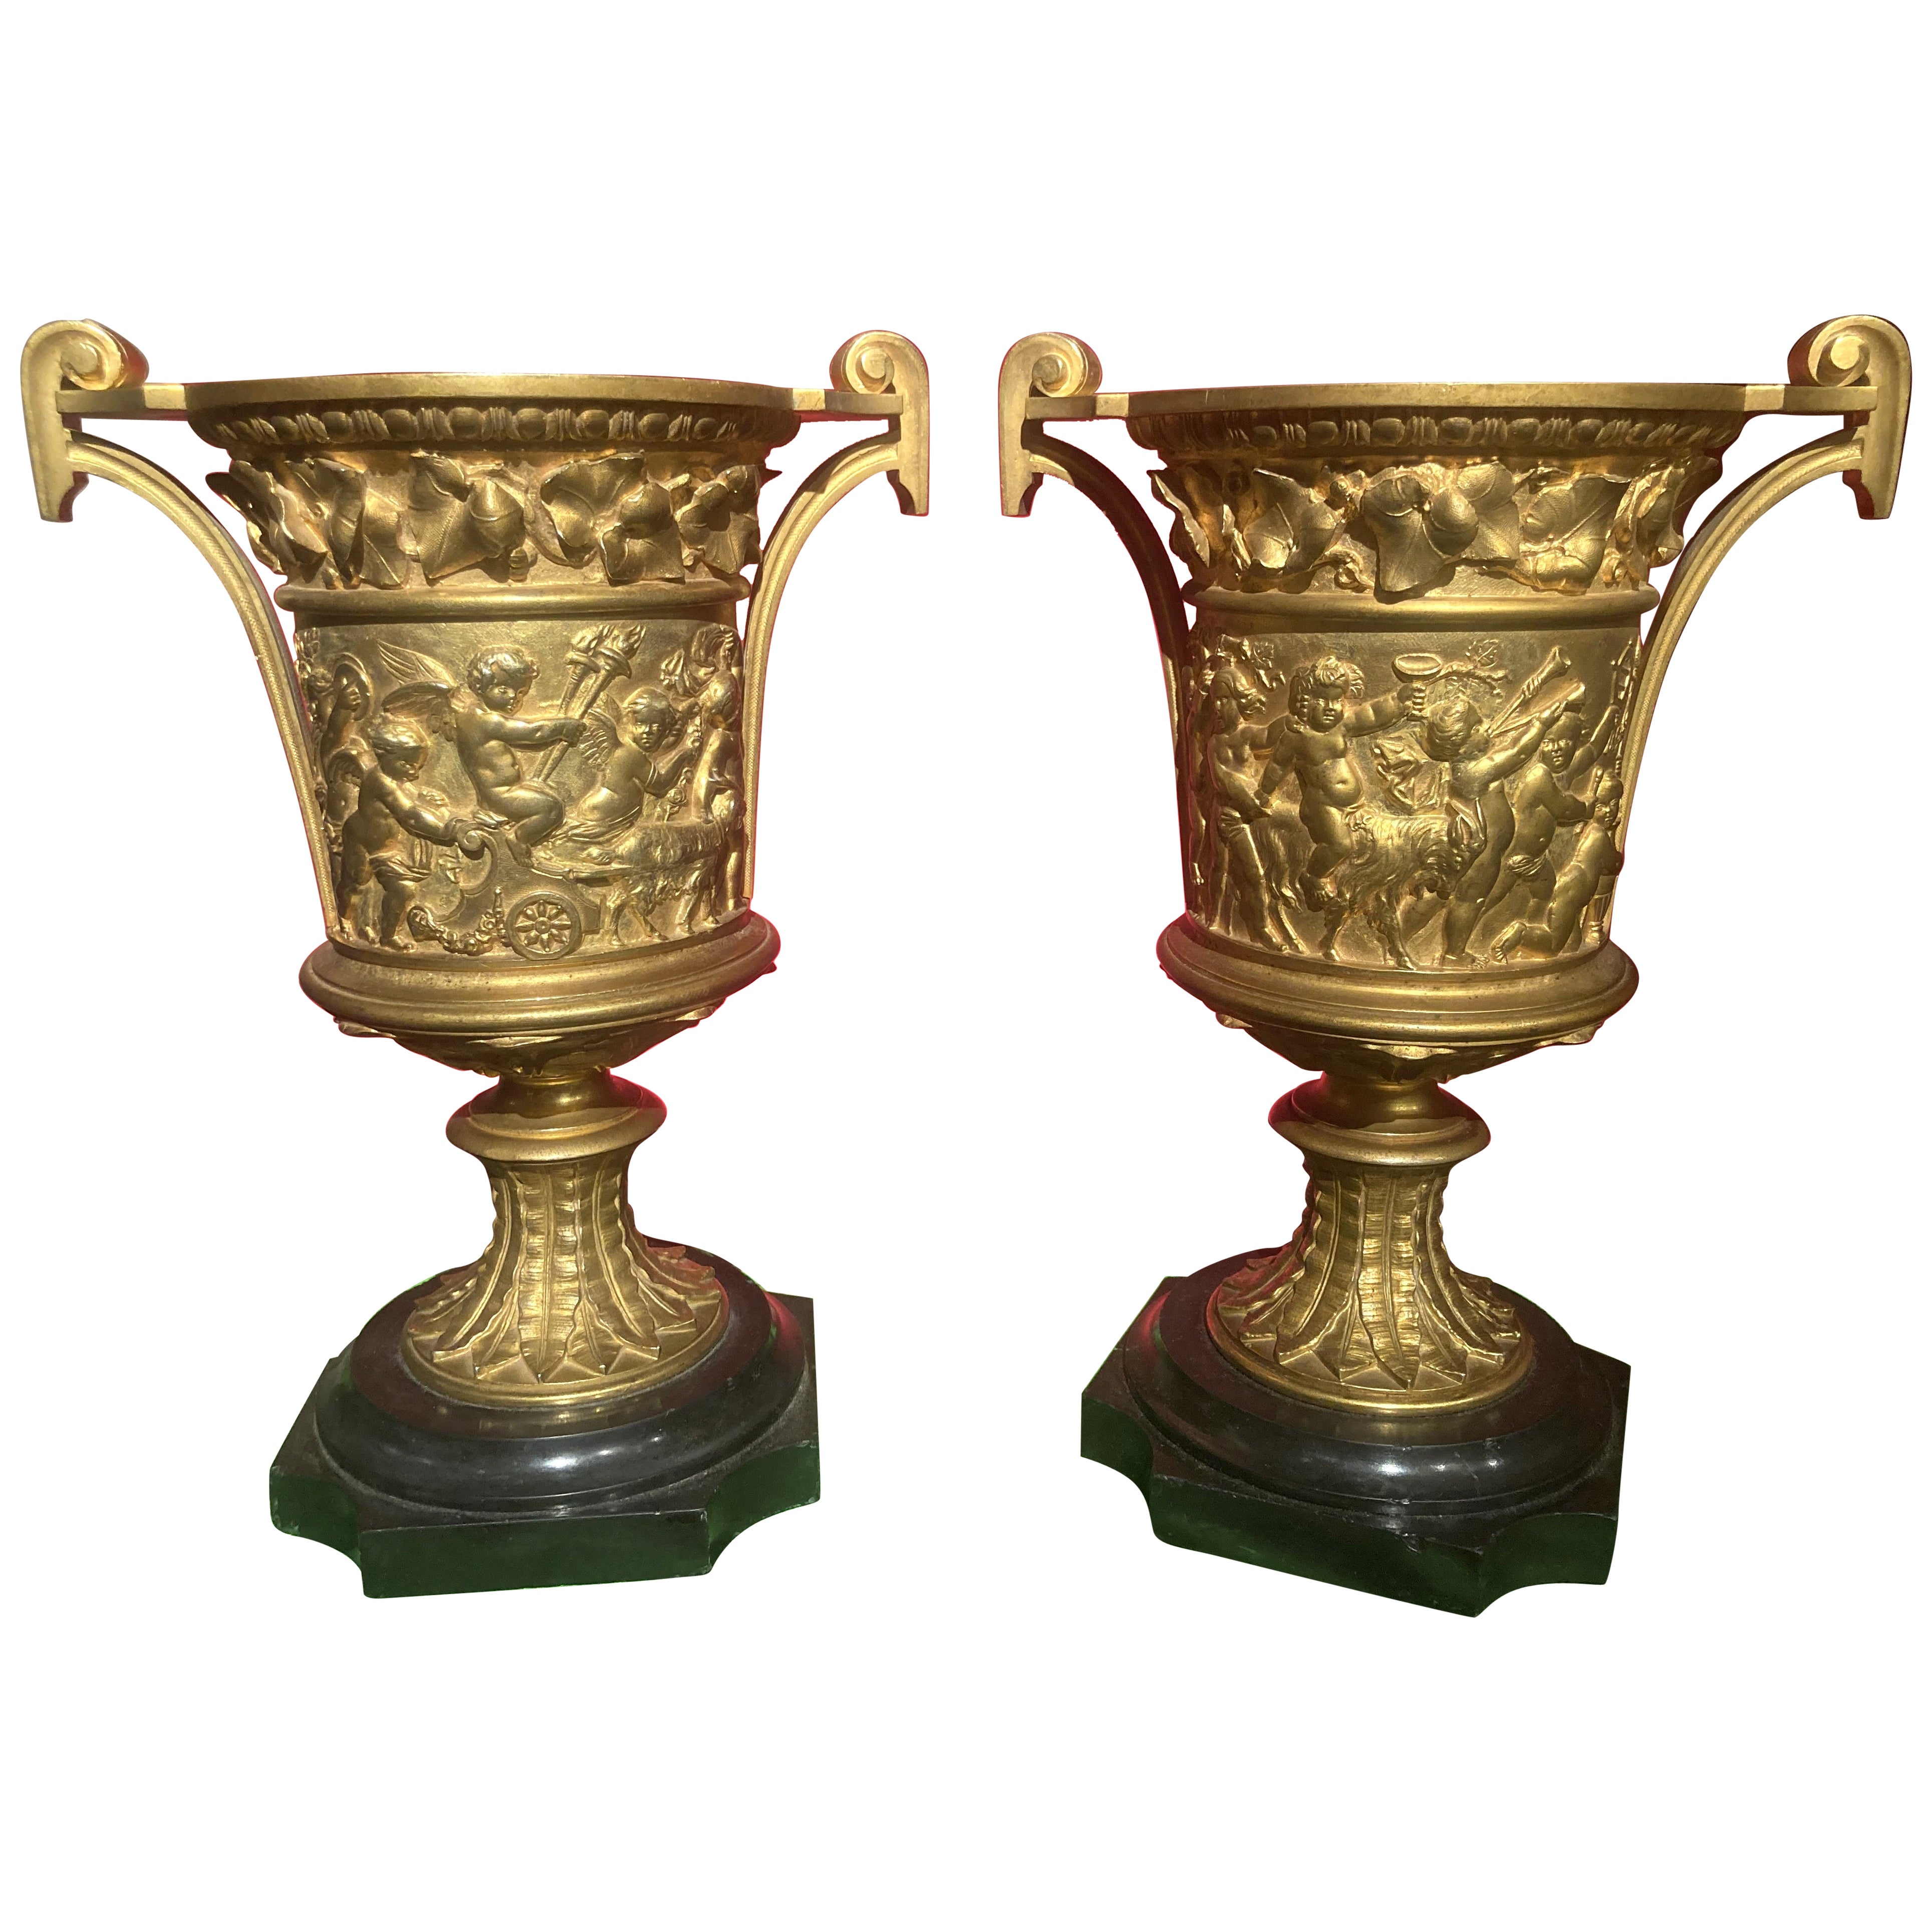 French 18th Century Louis XVI Ormolu Handled Vases, Relief Putto on Marble Base